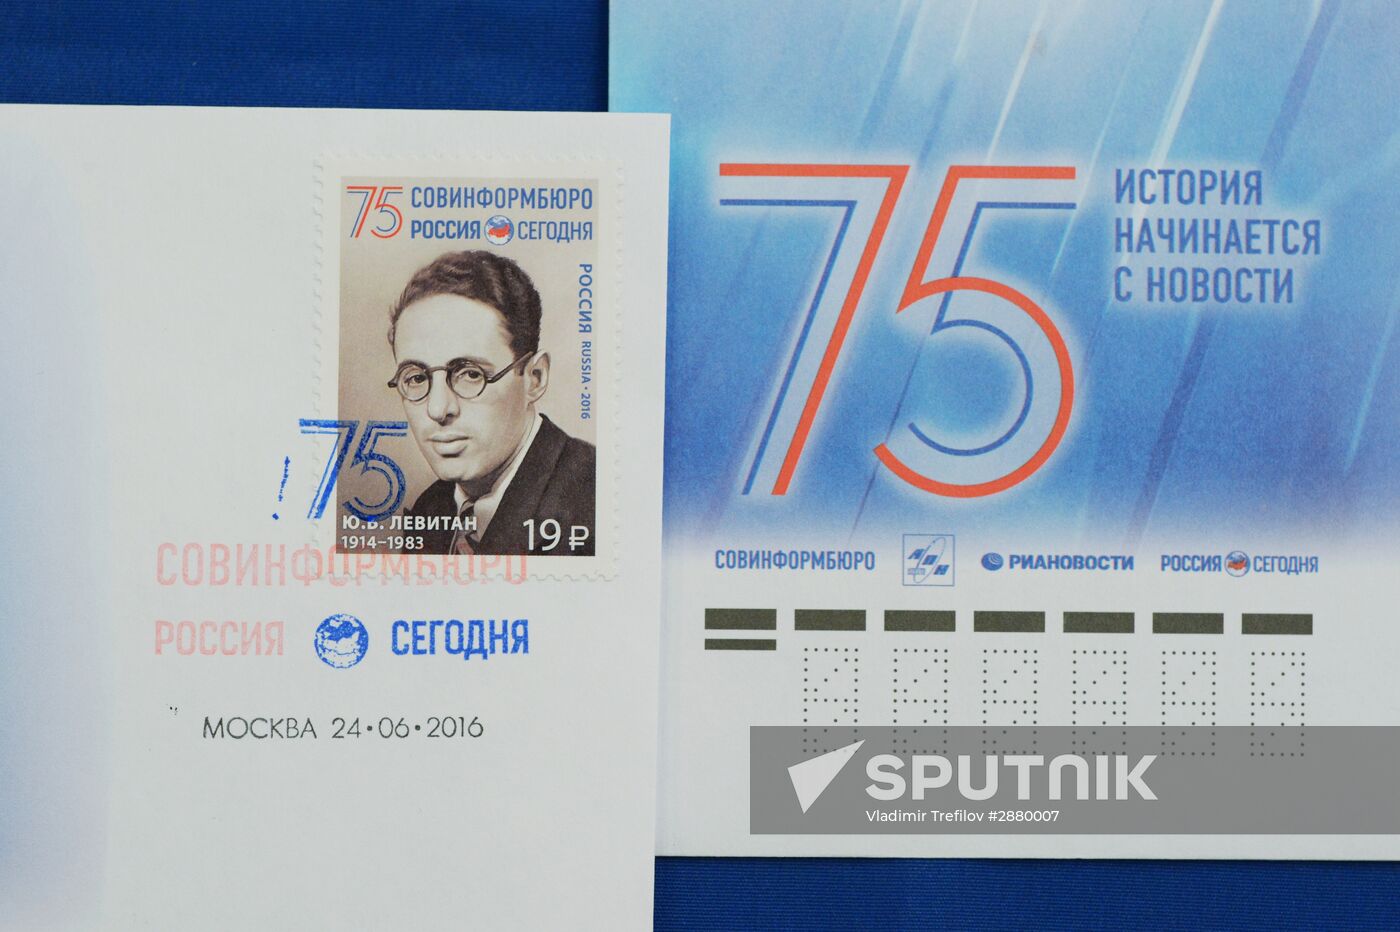 Cancellation of the 75th Anniversary of Sovinformburo stamp